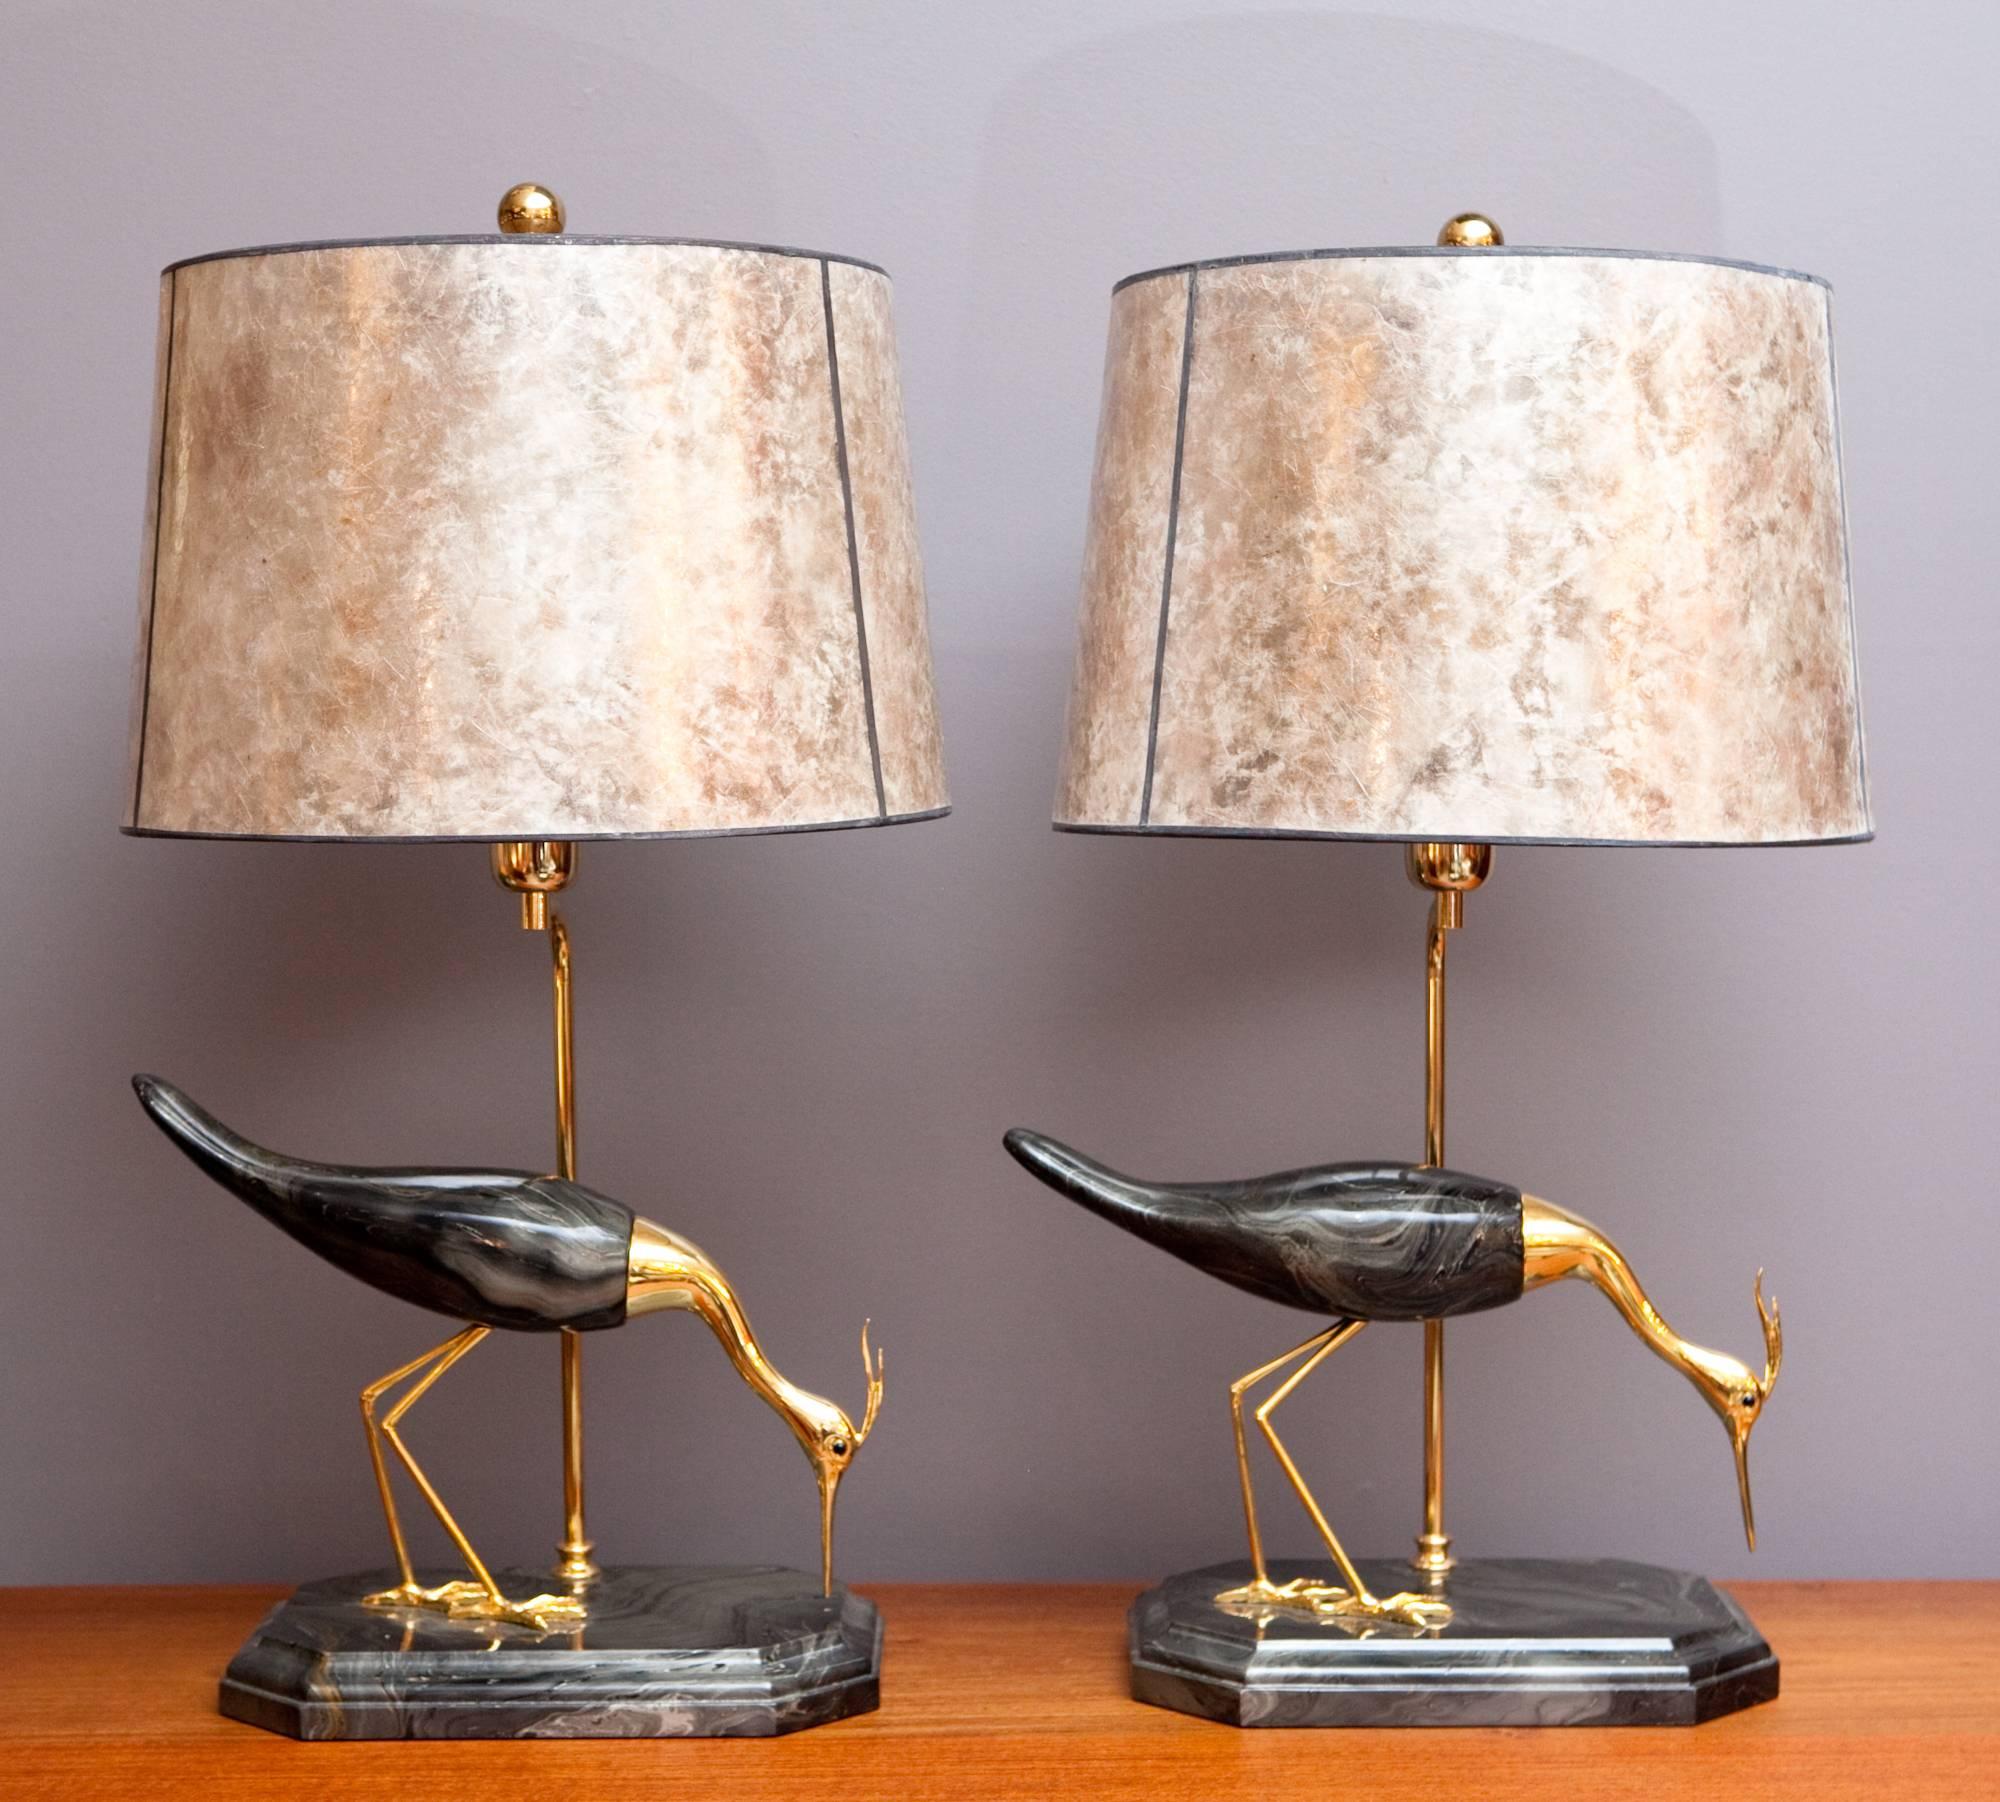 Exquisite and rare *new old stock* bird lamp by De Stijl Firenze, made in Italy, circa 1960s. These gorgeous lamps feature two slightly different herons carved out of strobo wood and hand decorated with swirled paint in emerald green, black, and